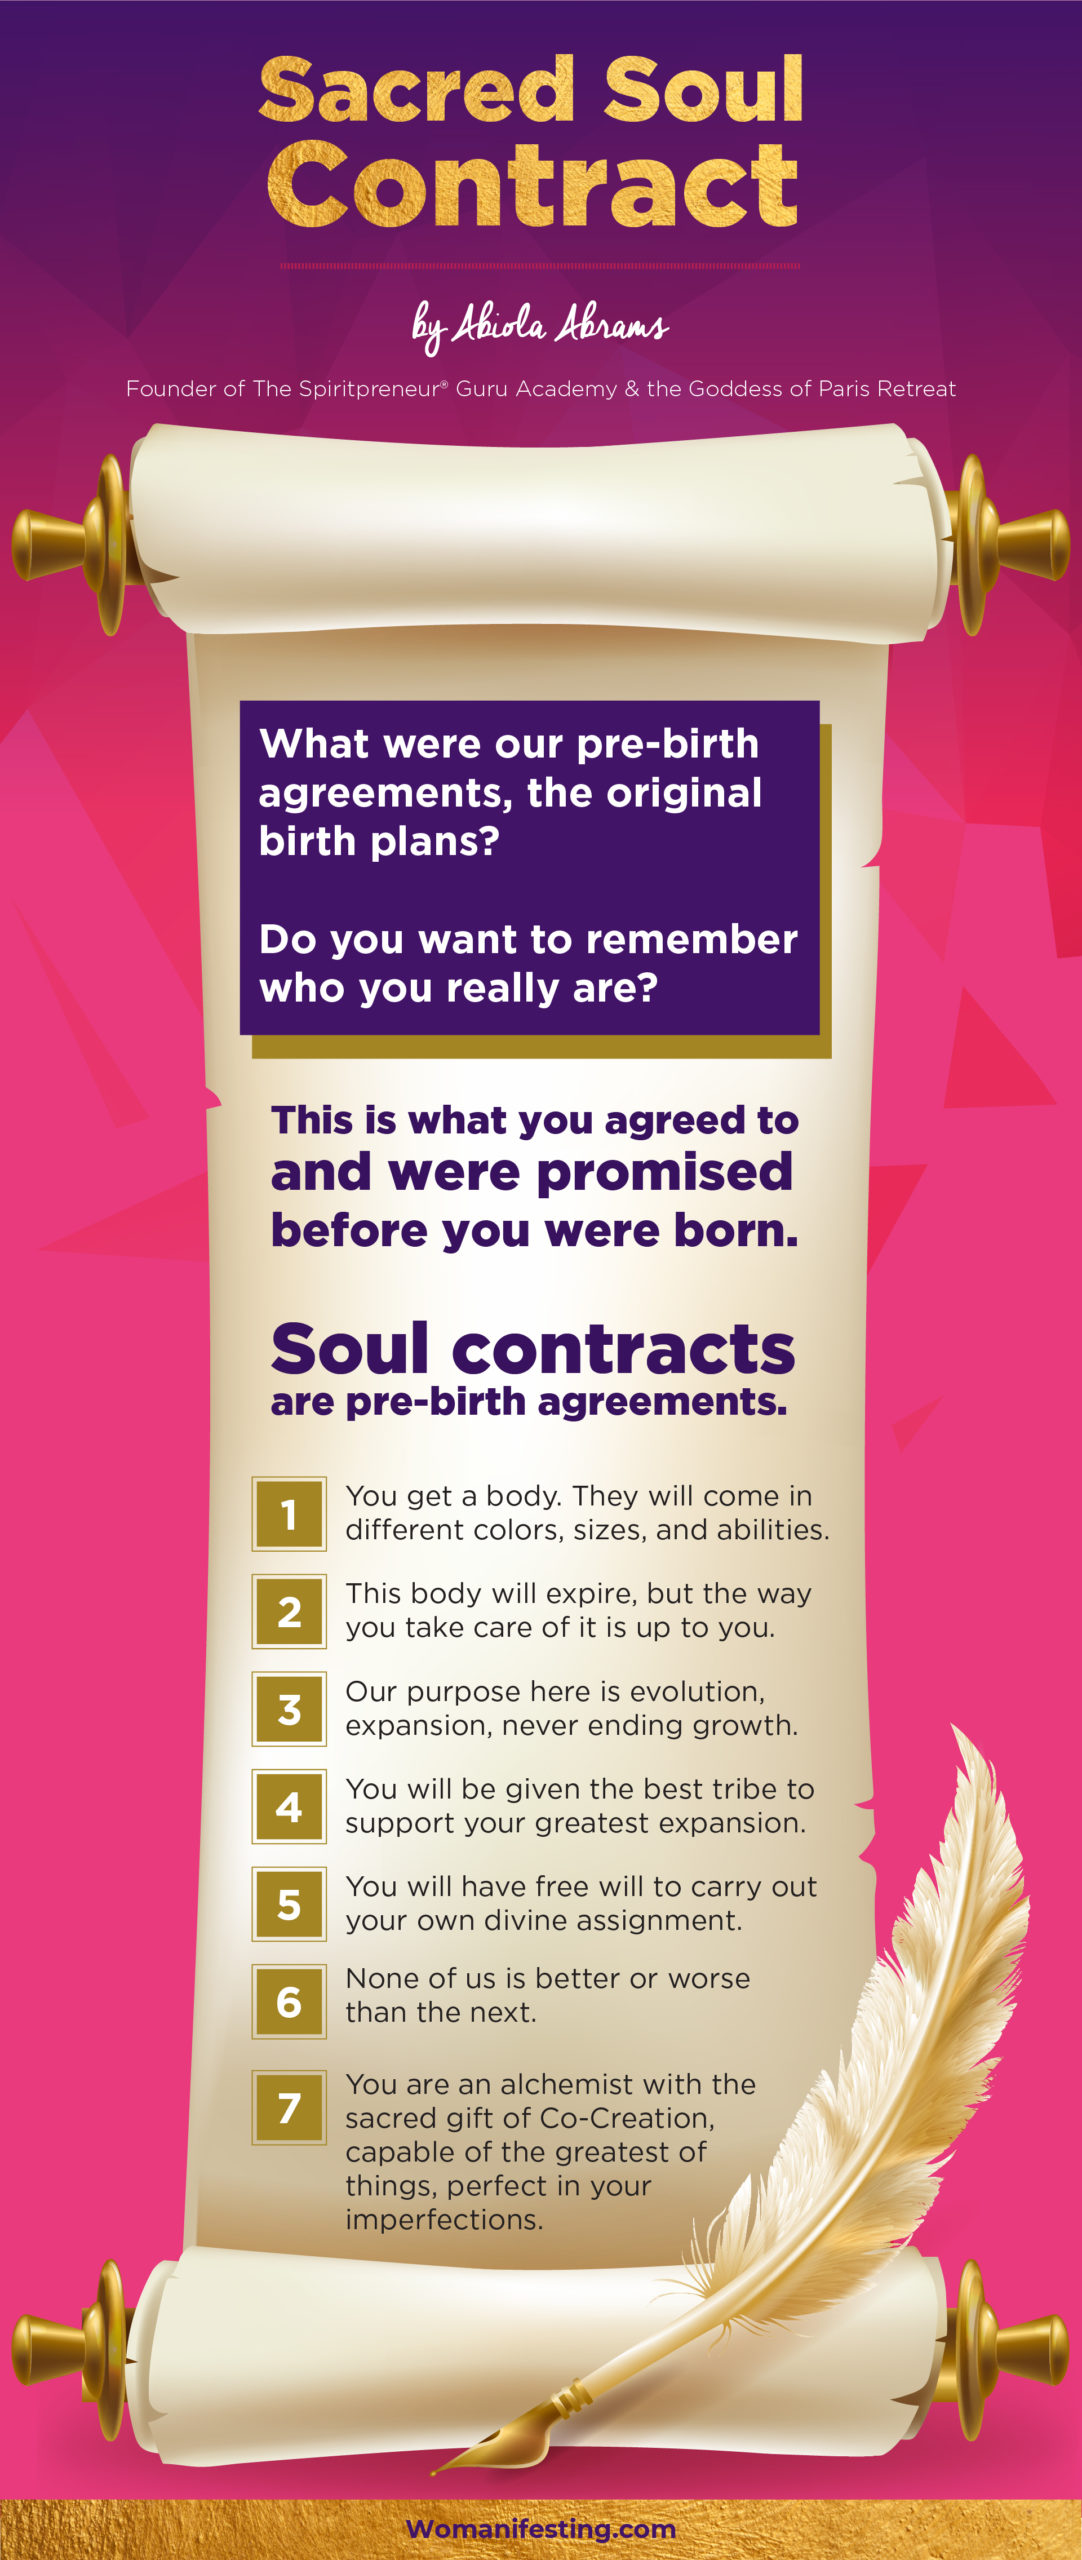 Sacred Soul Contracts! 7 Things You Agreed to Before You Were Born [Infographic]